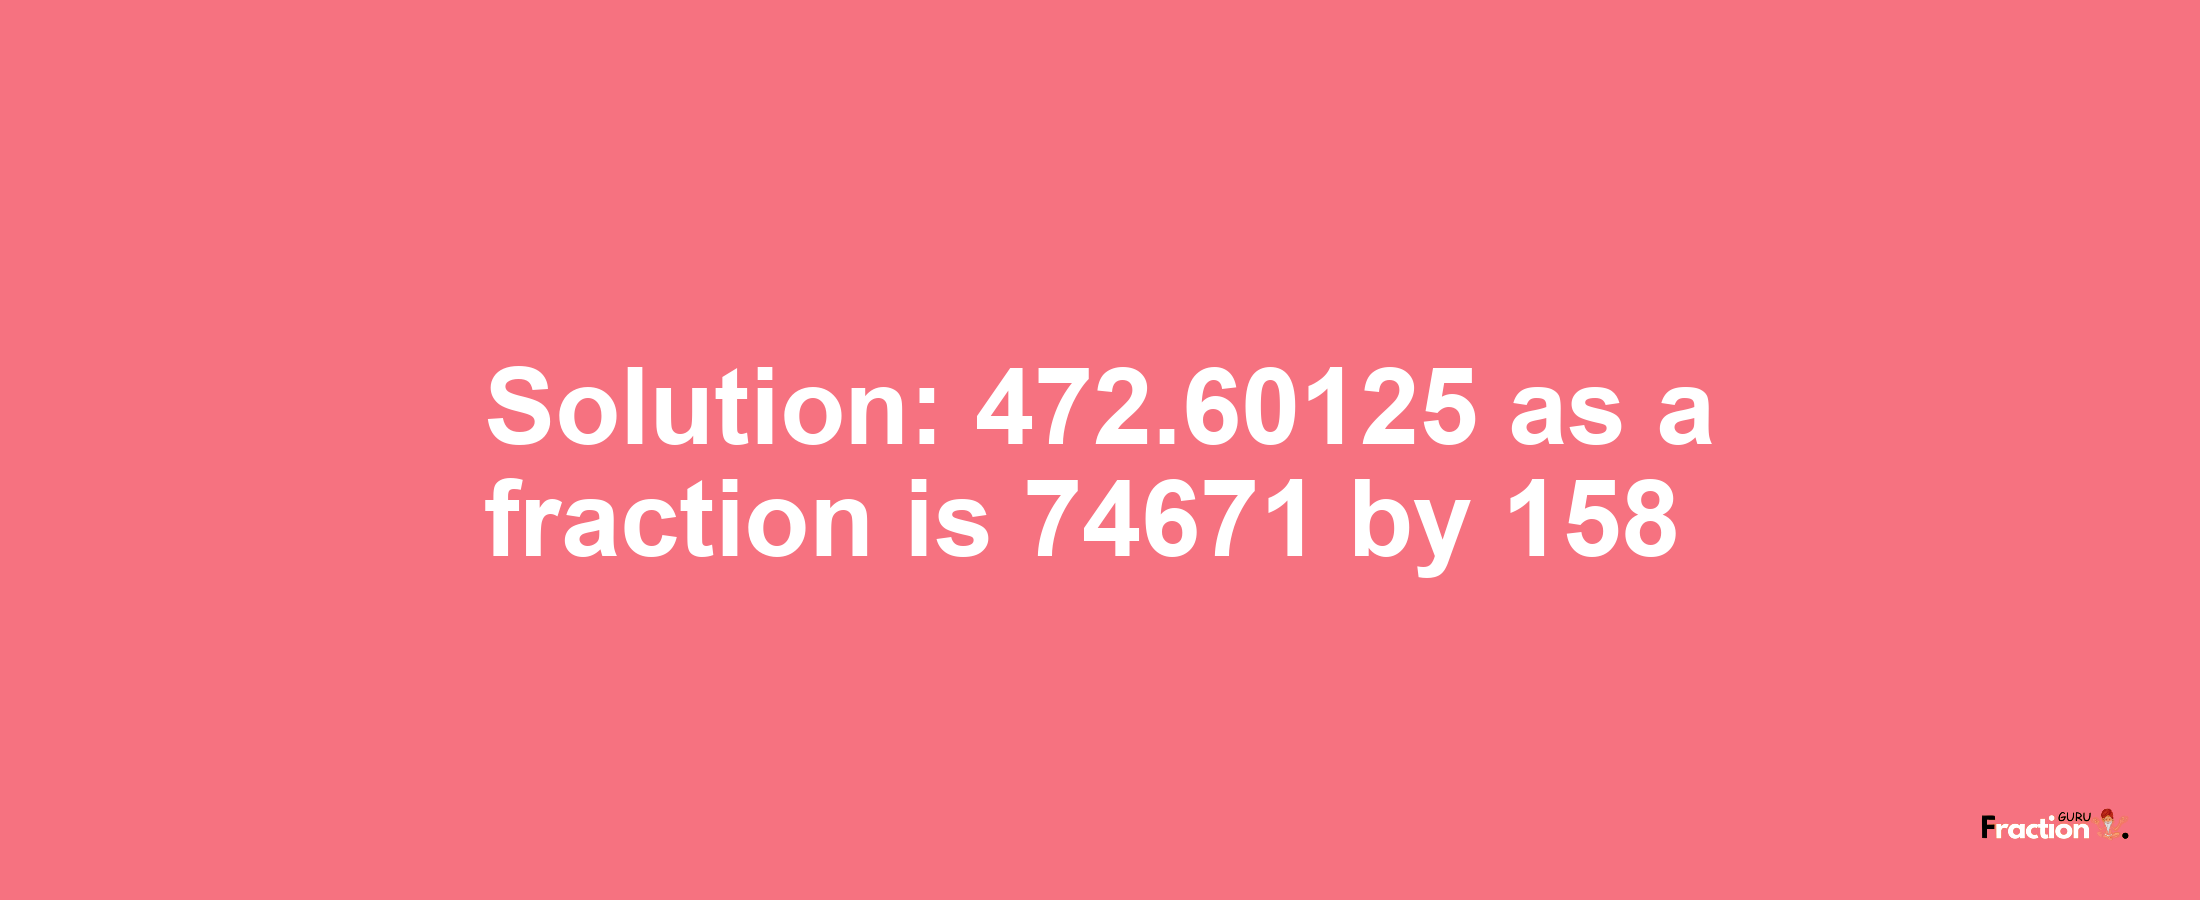 Solution:472.60125 as a fraction is 74671/158